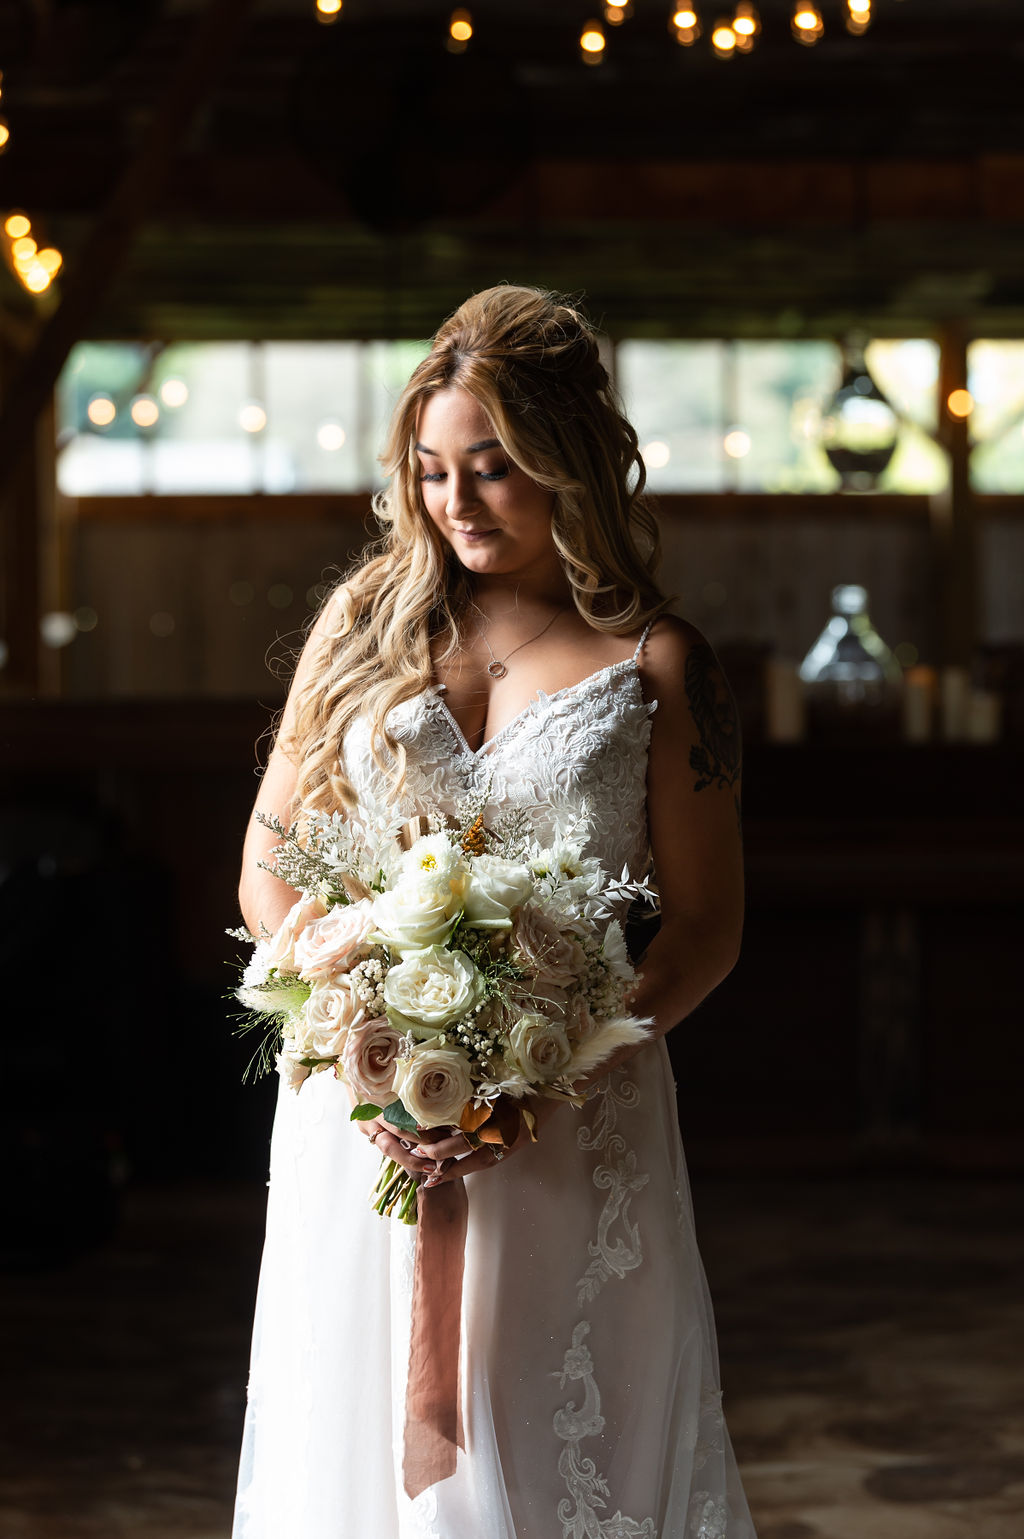 Bride looks down at her beautiful wedding bouquet in the getting ready space | choosing a getting ready space on your wedding day